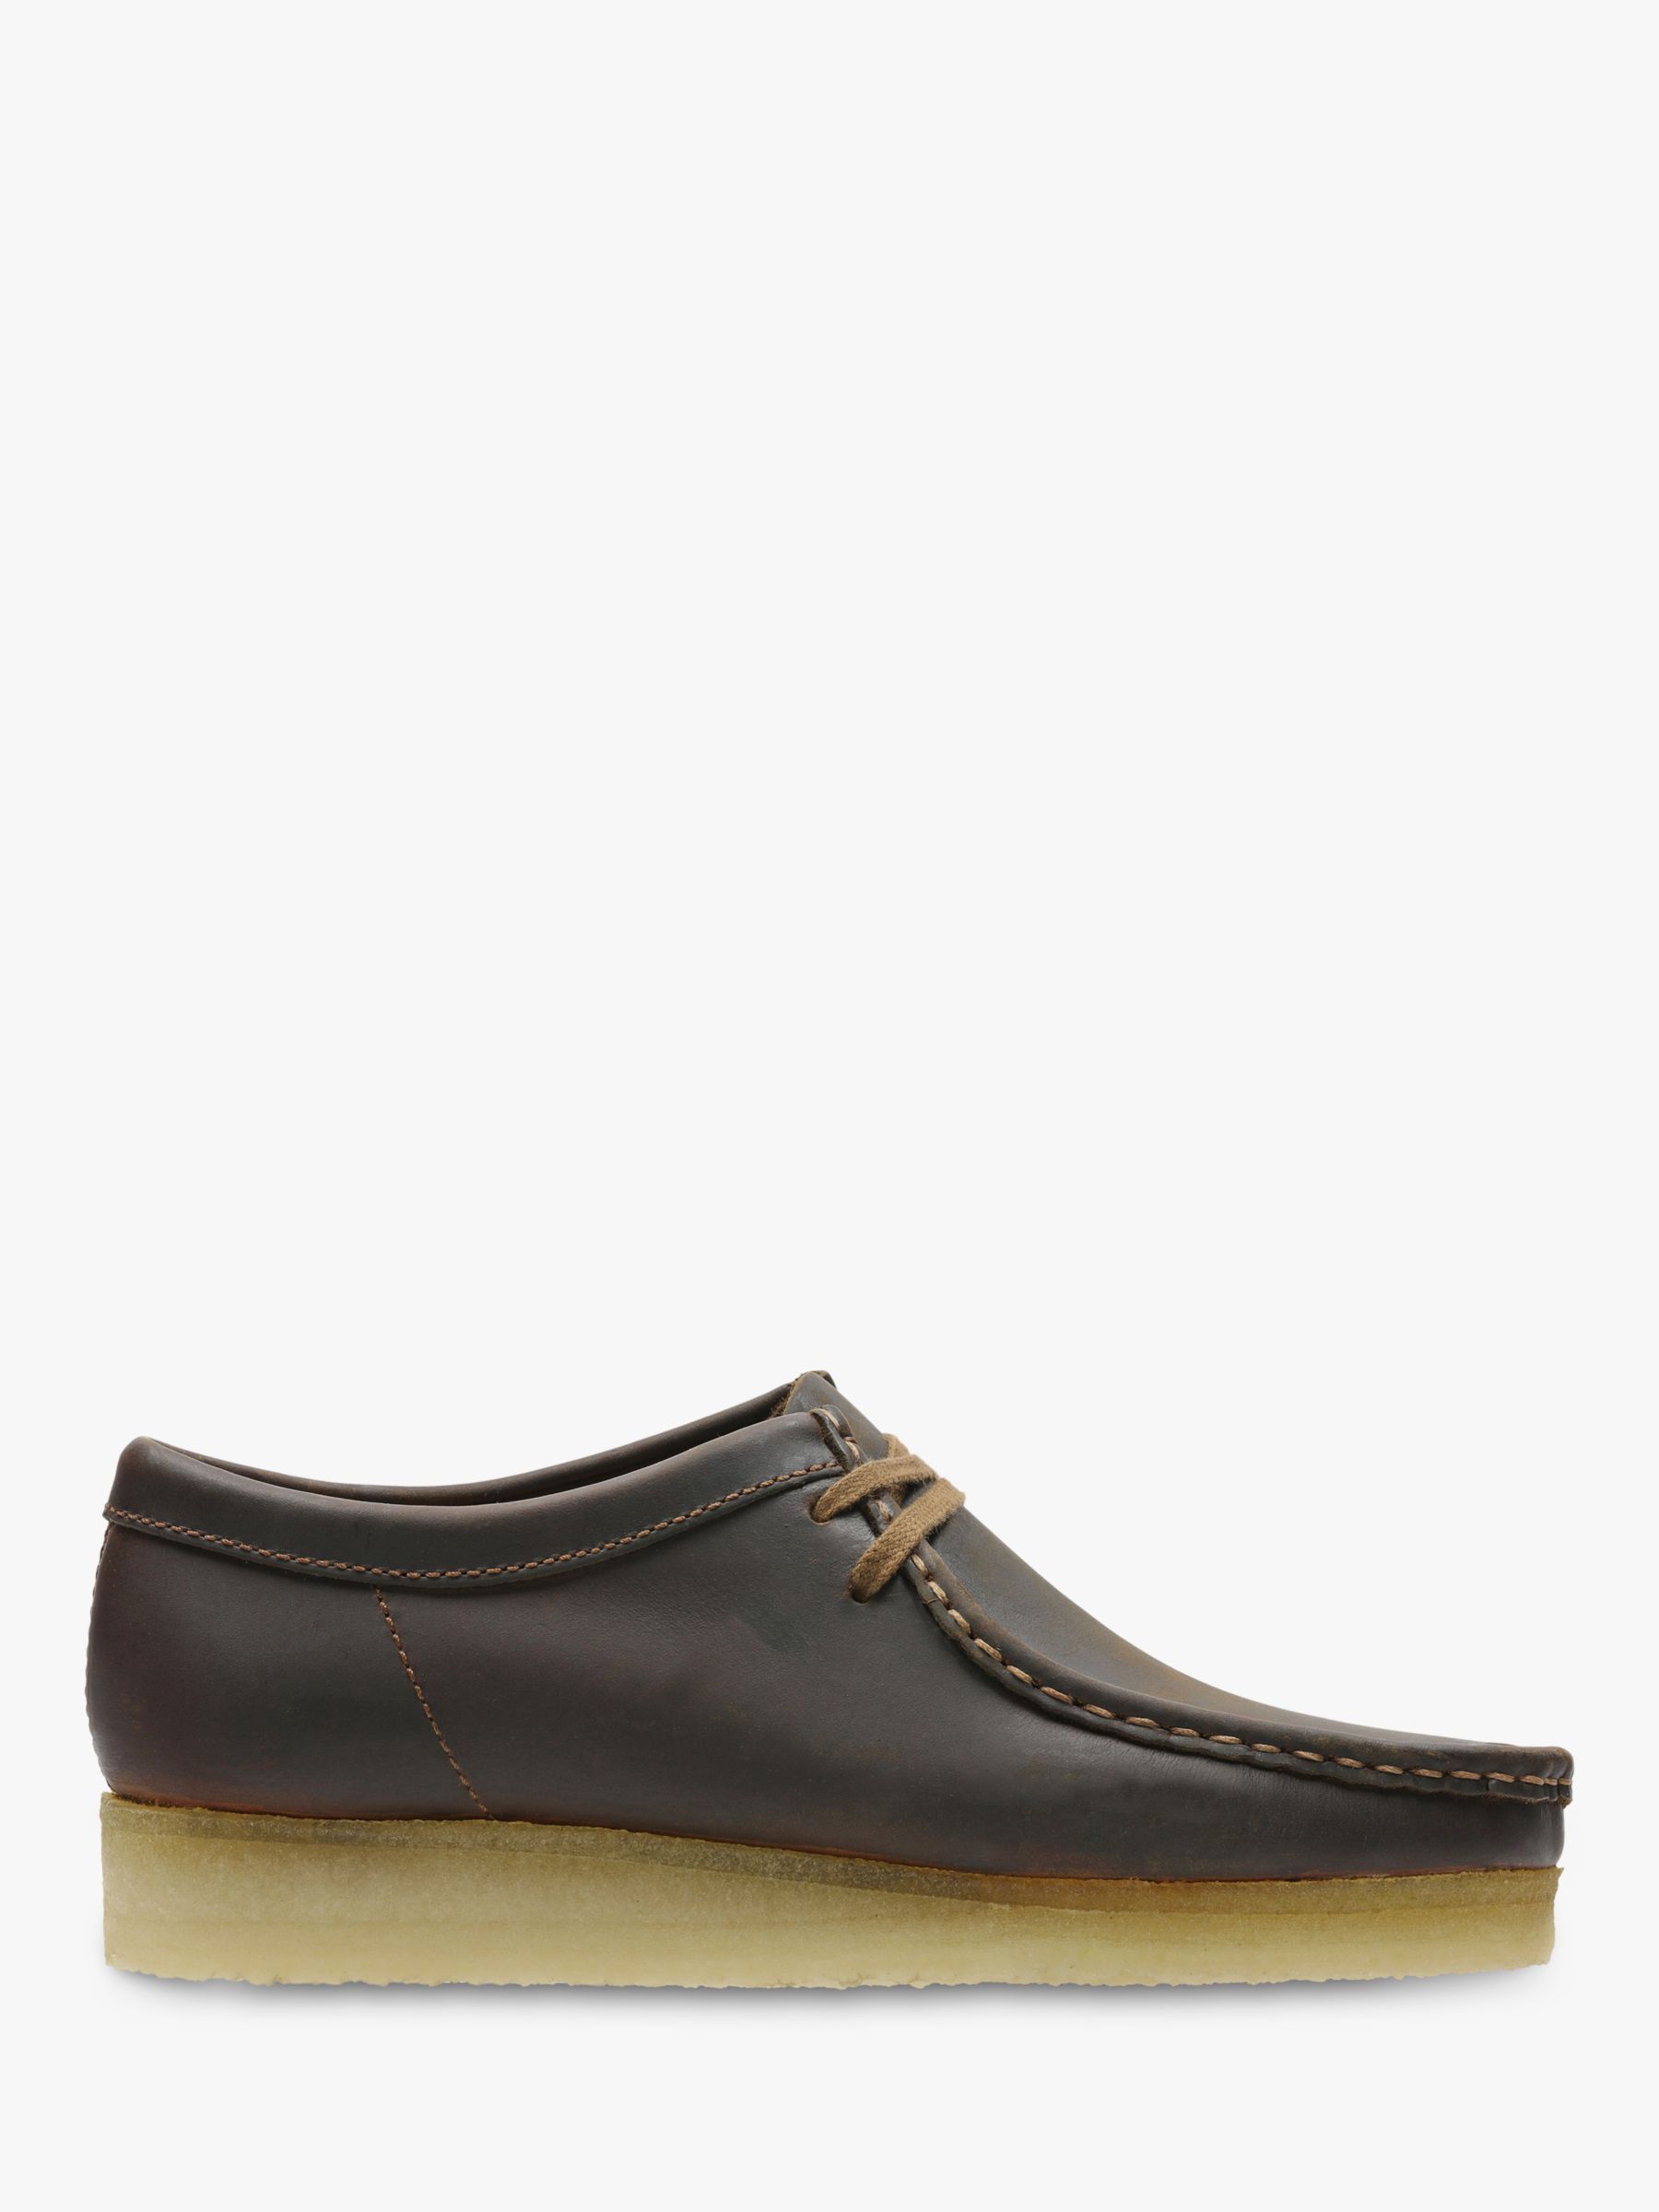 Clarks Originals Leather Wallabee Shoes, Beeswax